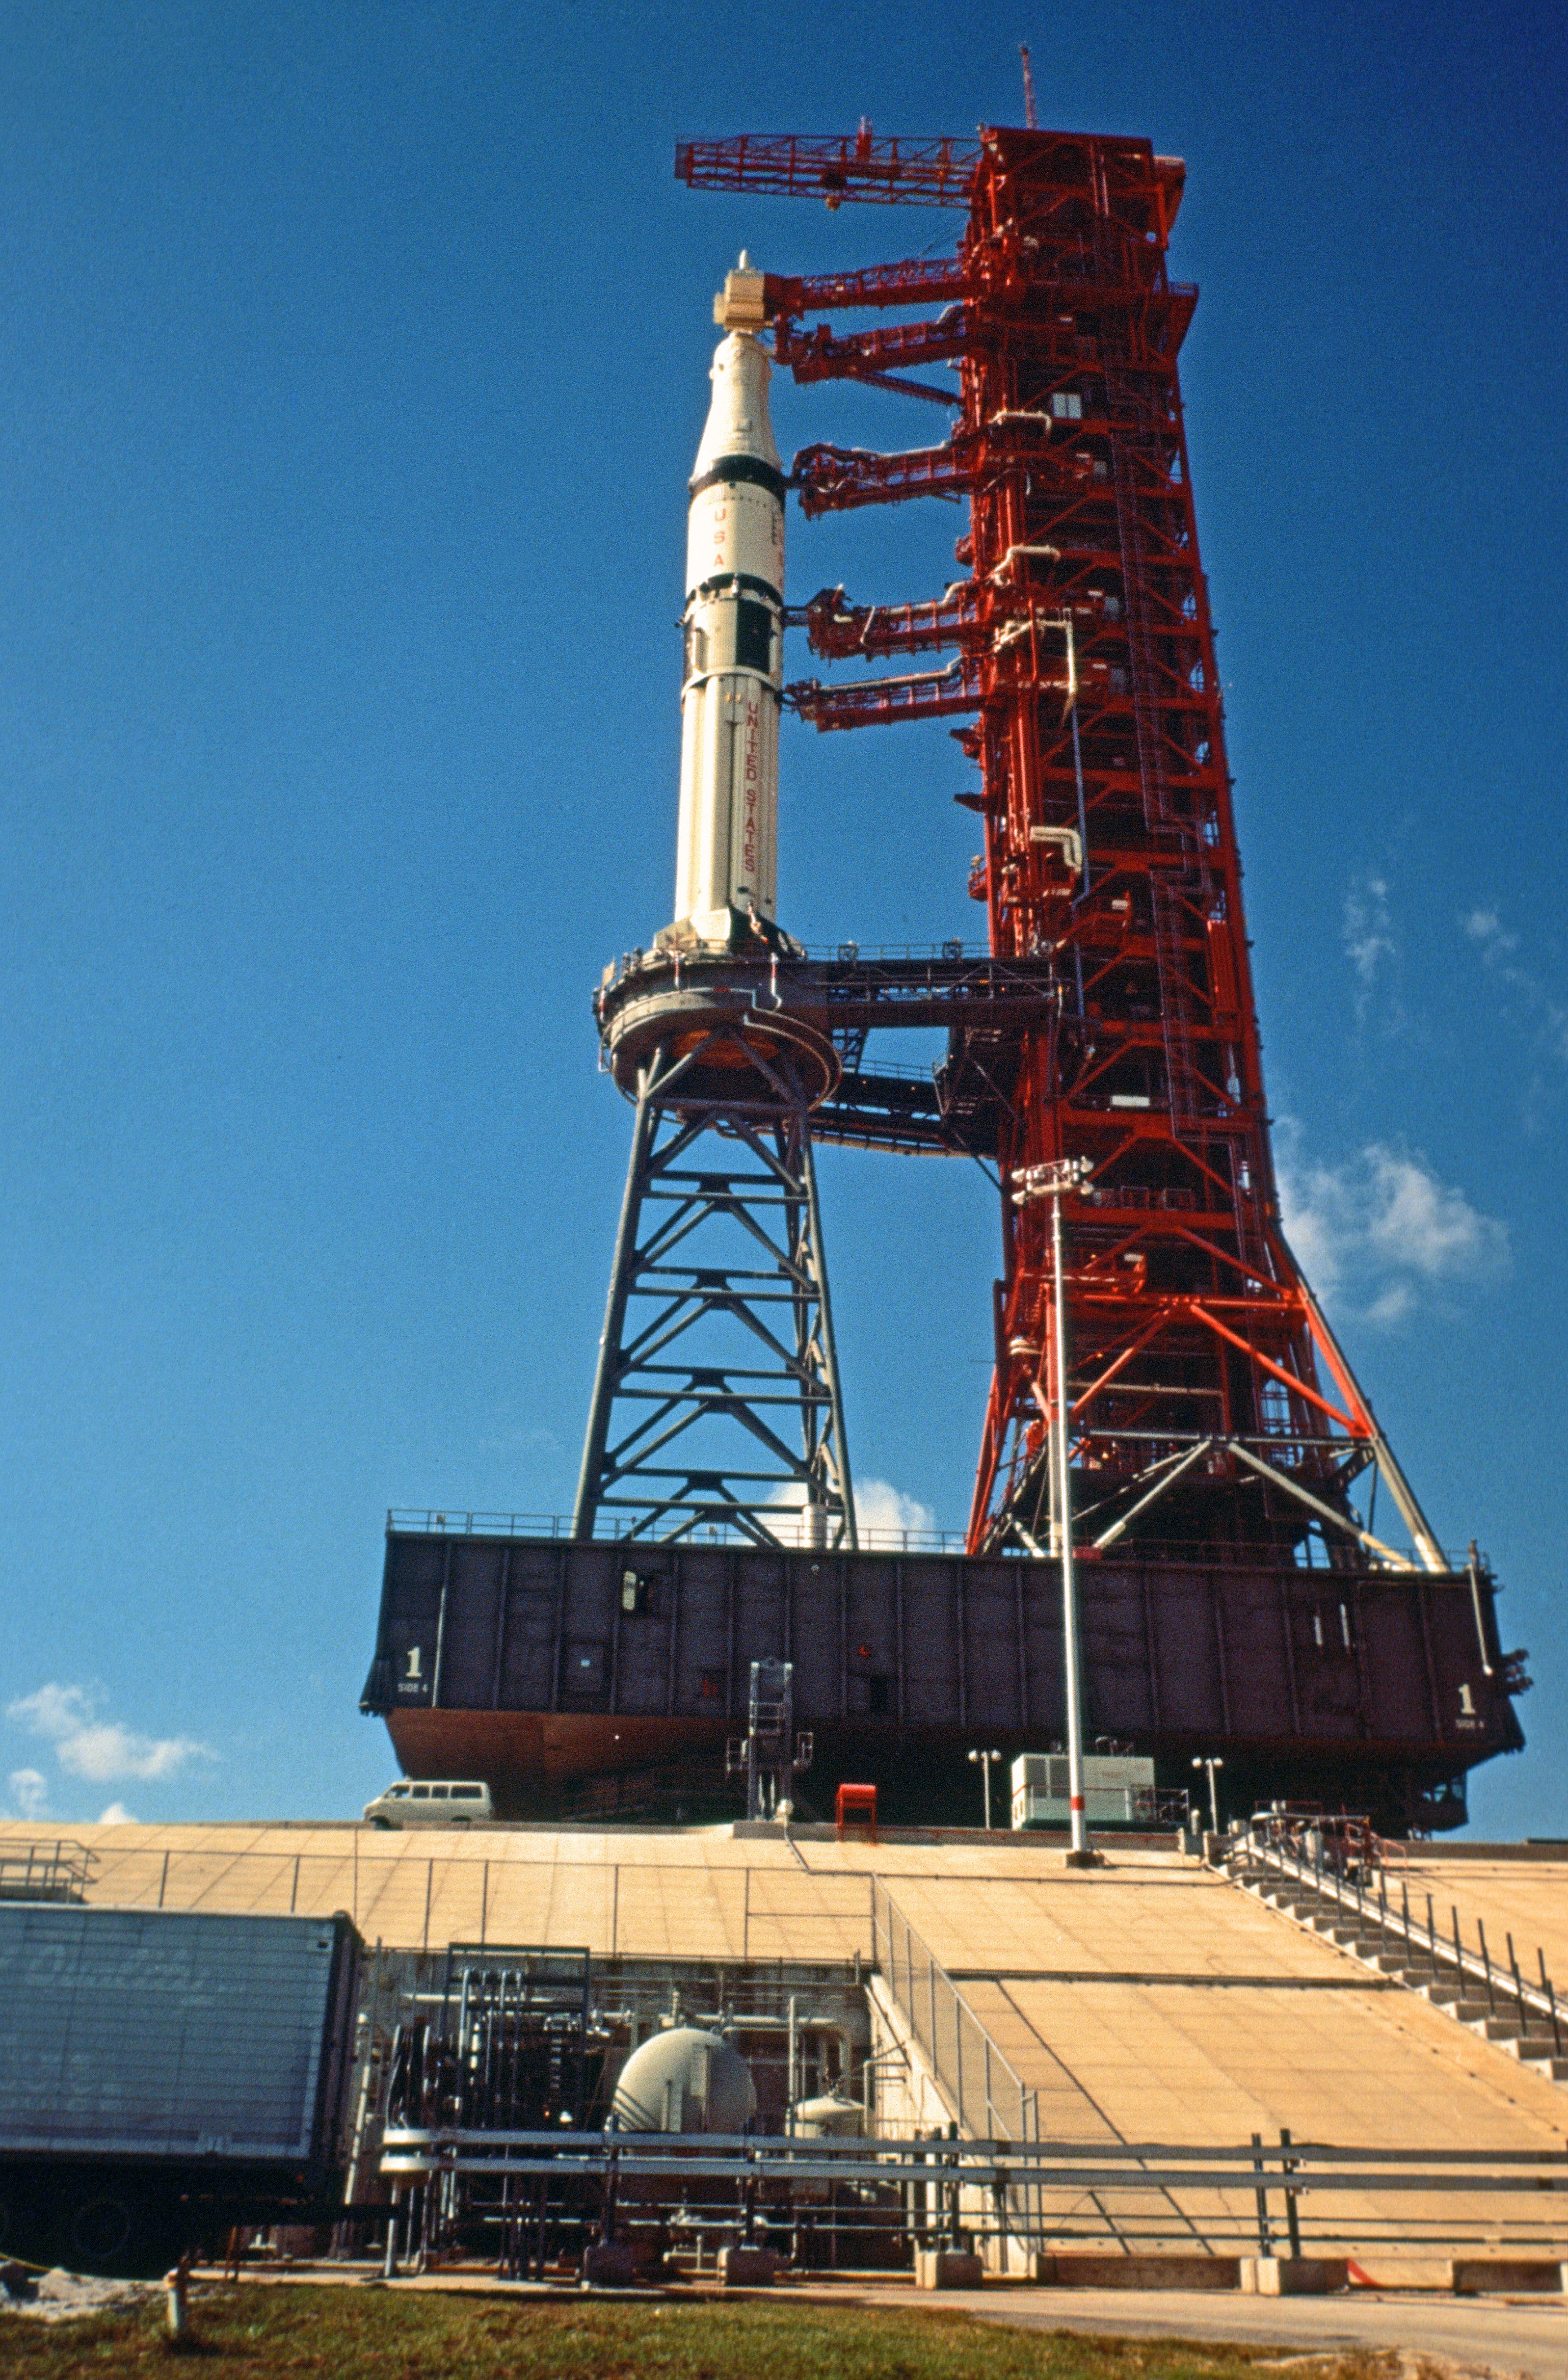 Breaking News Image of the Skylab 4 rescue automobile at Initiate Pad 39B